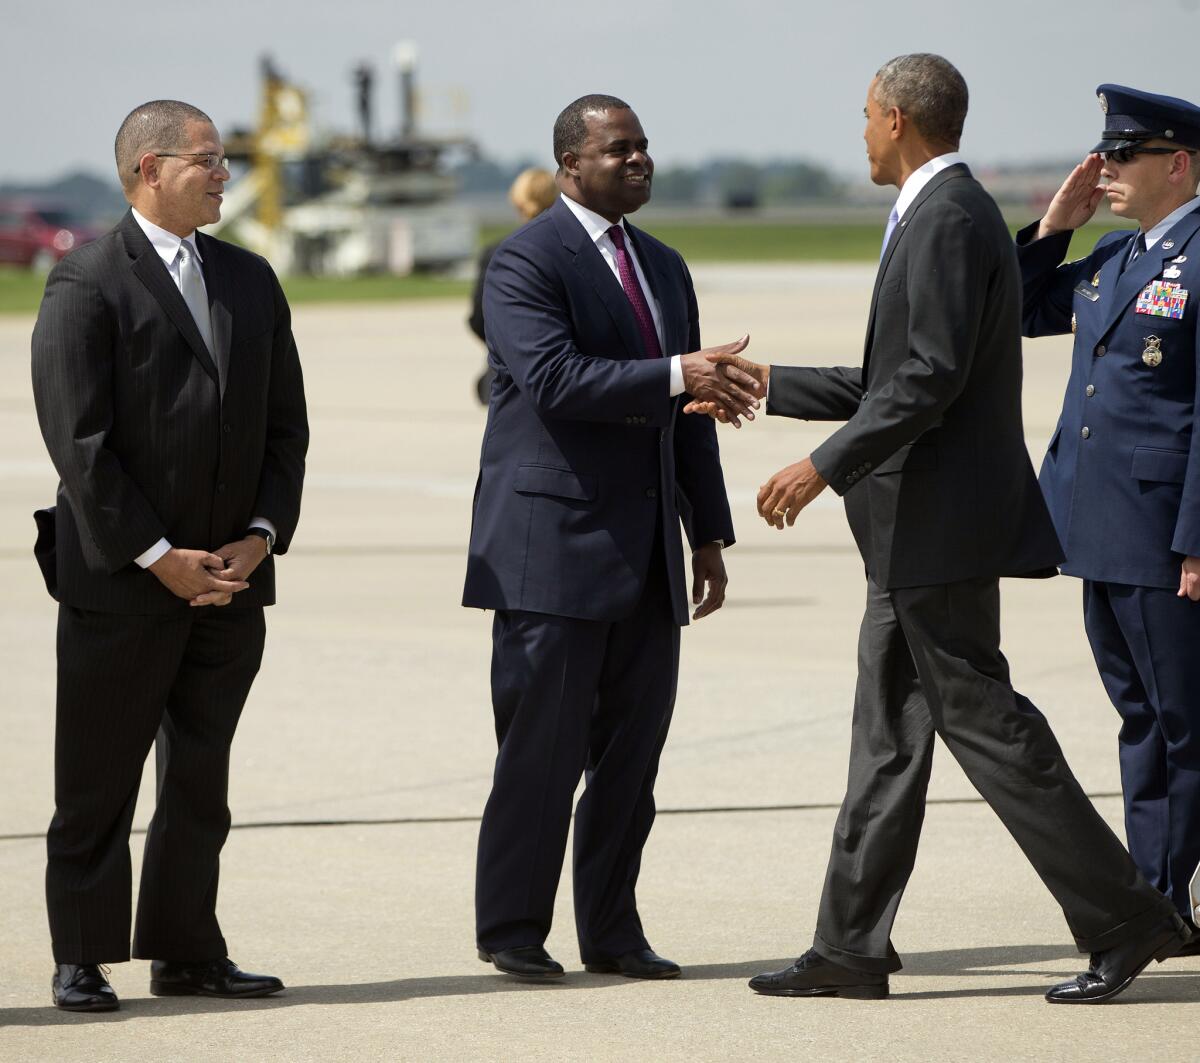 President Obama, right, is greeted by Atlanta Mayor Kasim Reed, center, and Fulton County Commissioner John Eaves, left, upon his arrival in Atlanta on Sept. 16.